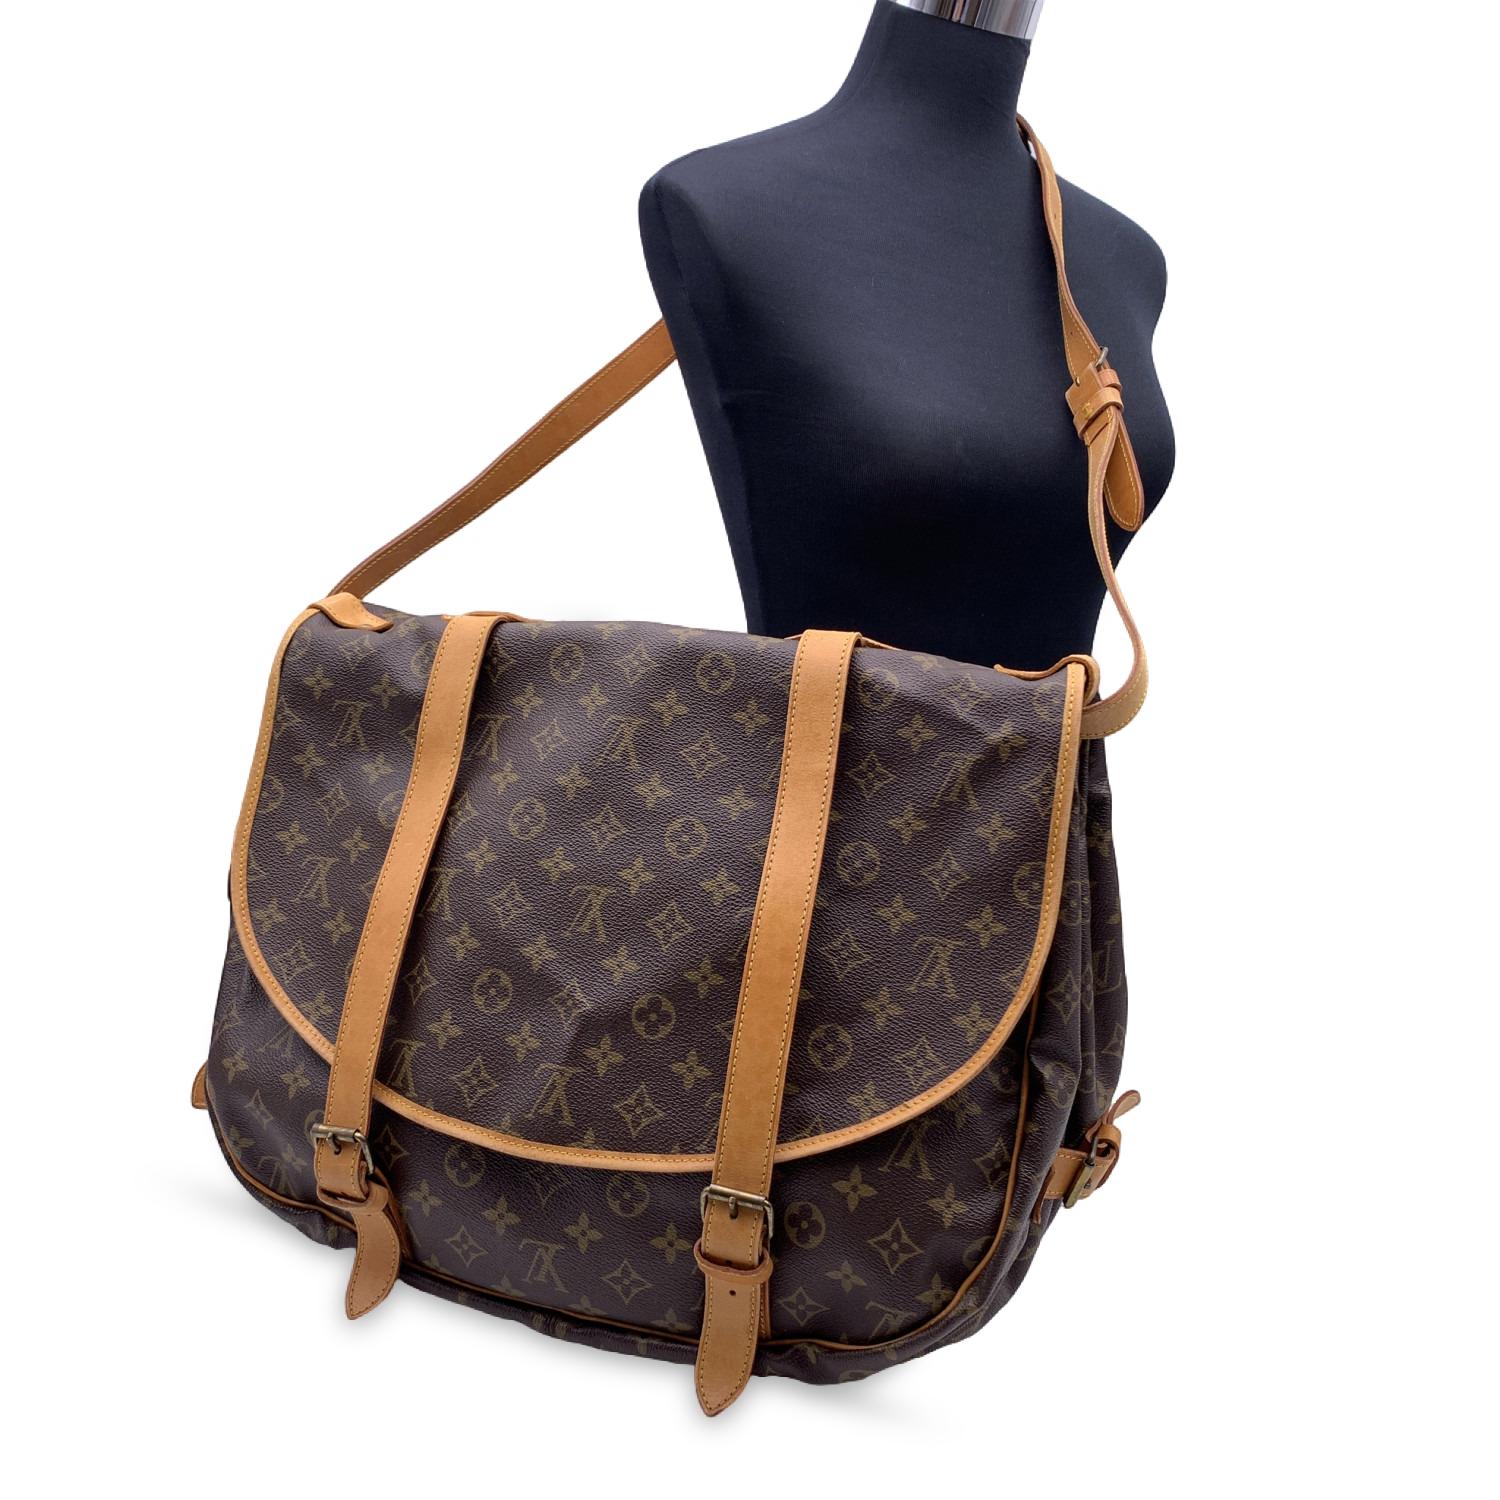 Rare Louis Vuitton Saumur 40 Messenger Bag. The largest model of the Saumur line. Discontinued model, very collectible. Inspired by equestrian 'SADDLE' bag, the legendry SAUMUR 40 features dual front compartments, held tightly together at the sides